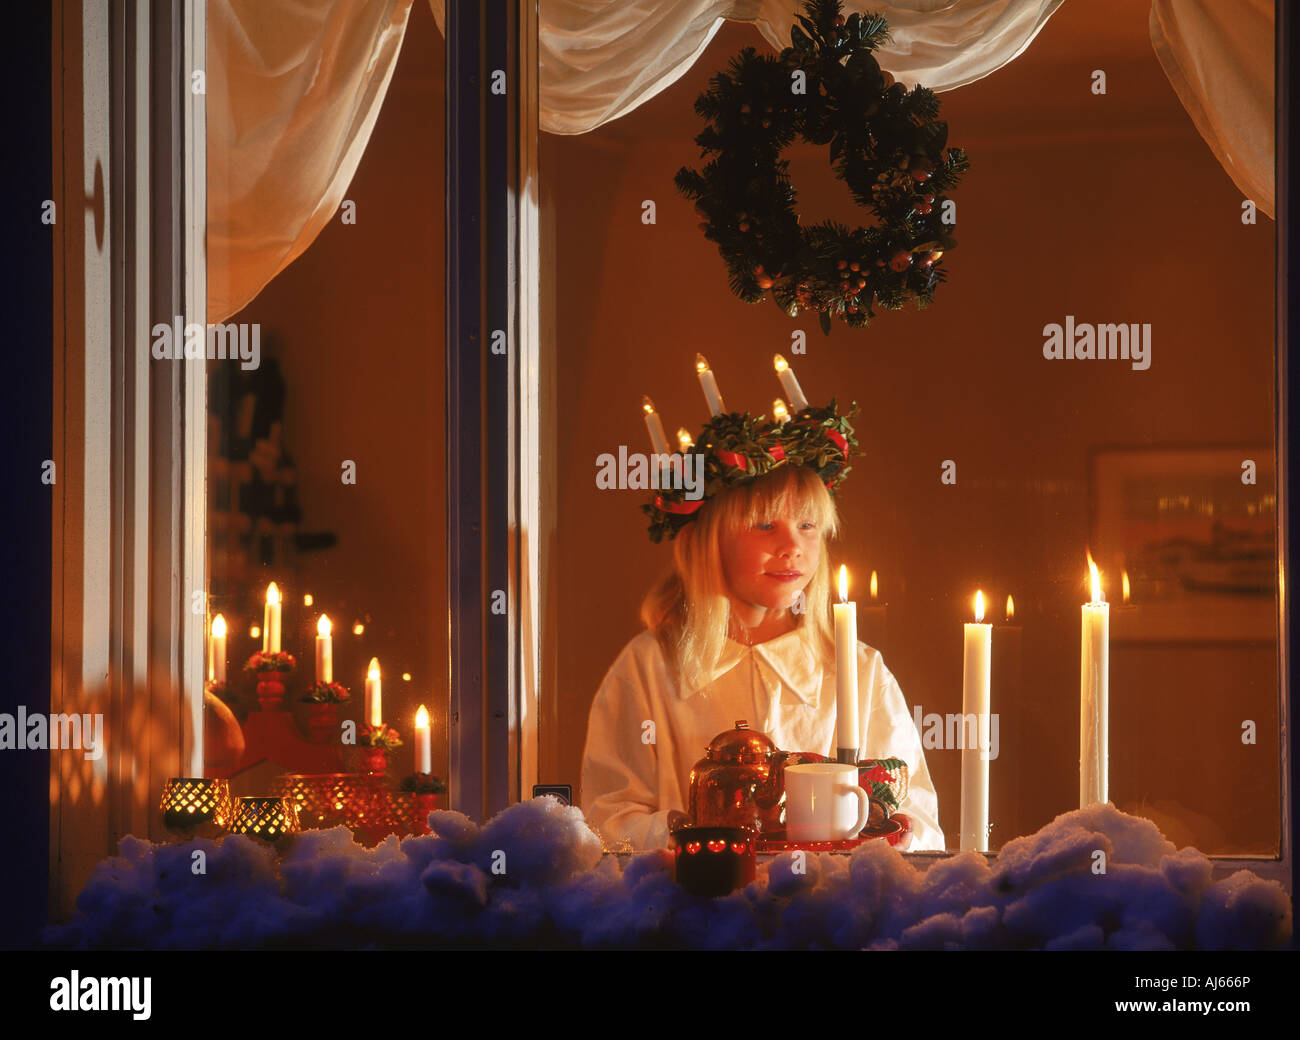 December 13th in Sweden is Santa or Saint Lucia Day when children wear coronets of candles Stock Photo